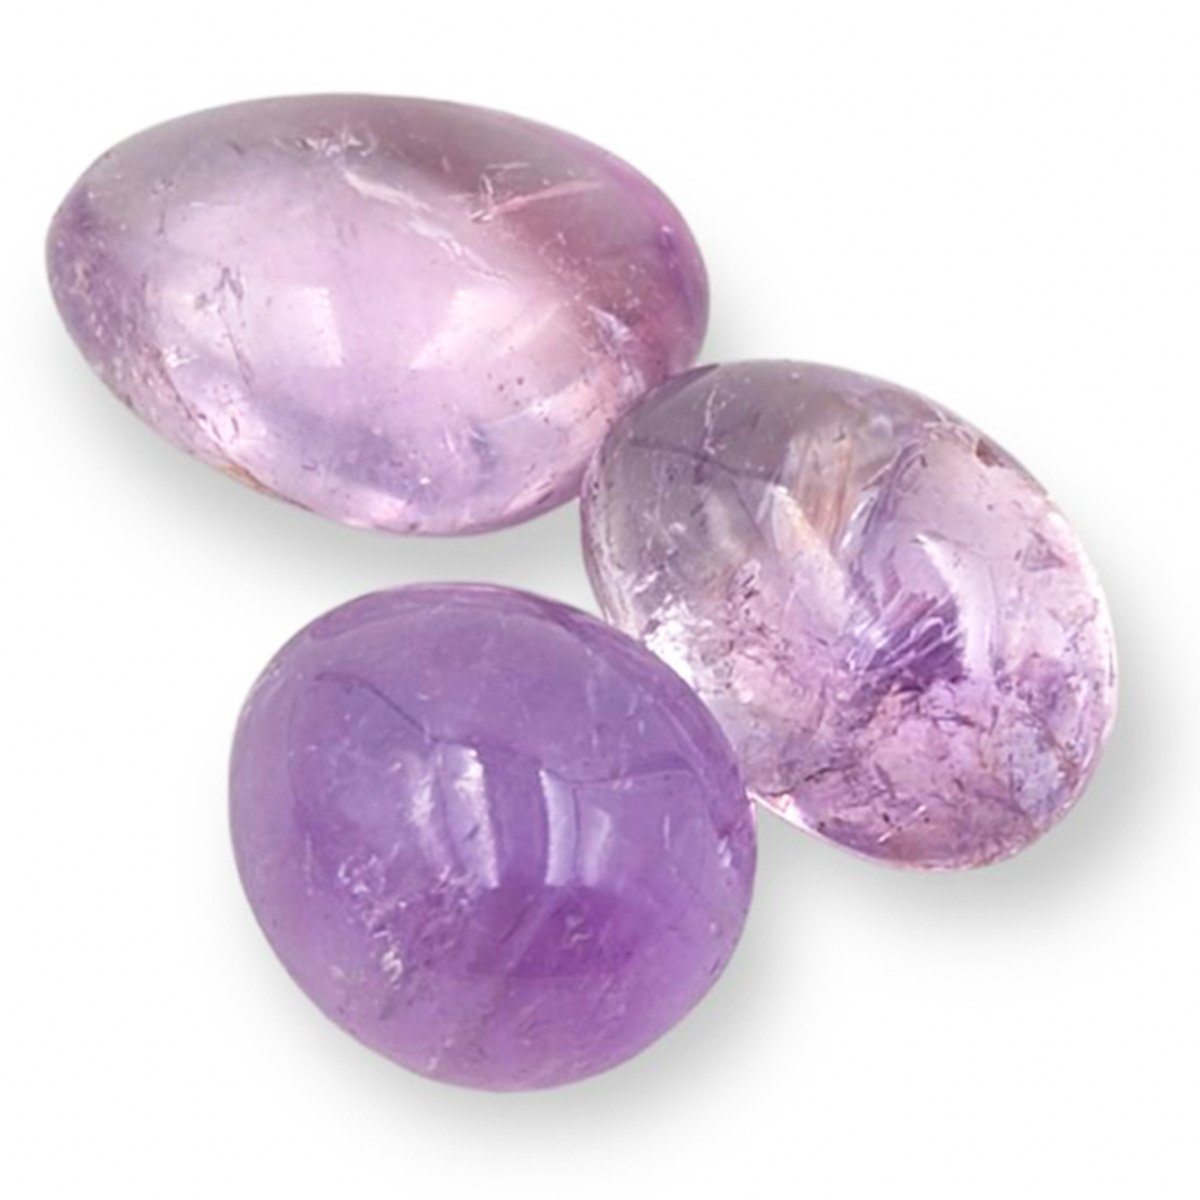 Colored stone, violet stone, amethyst